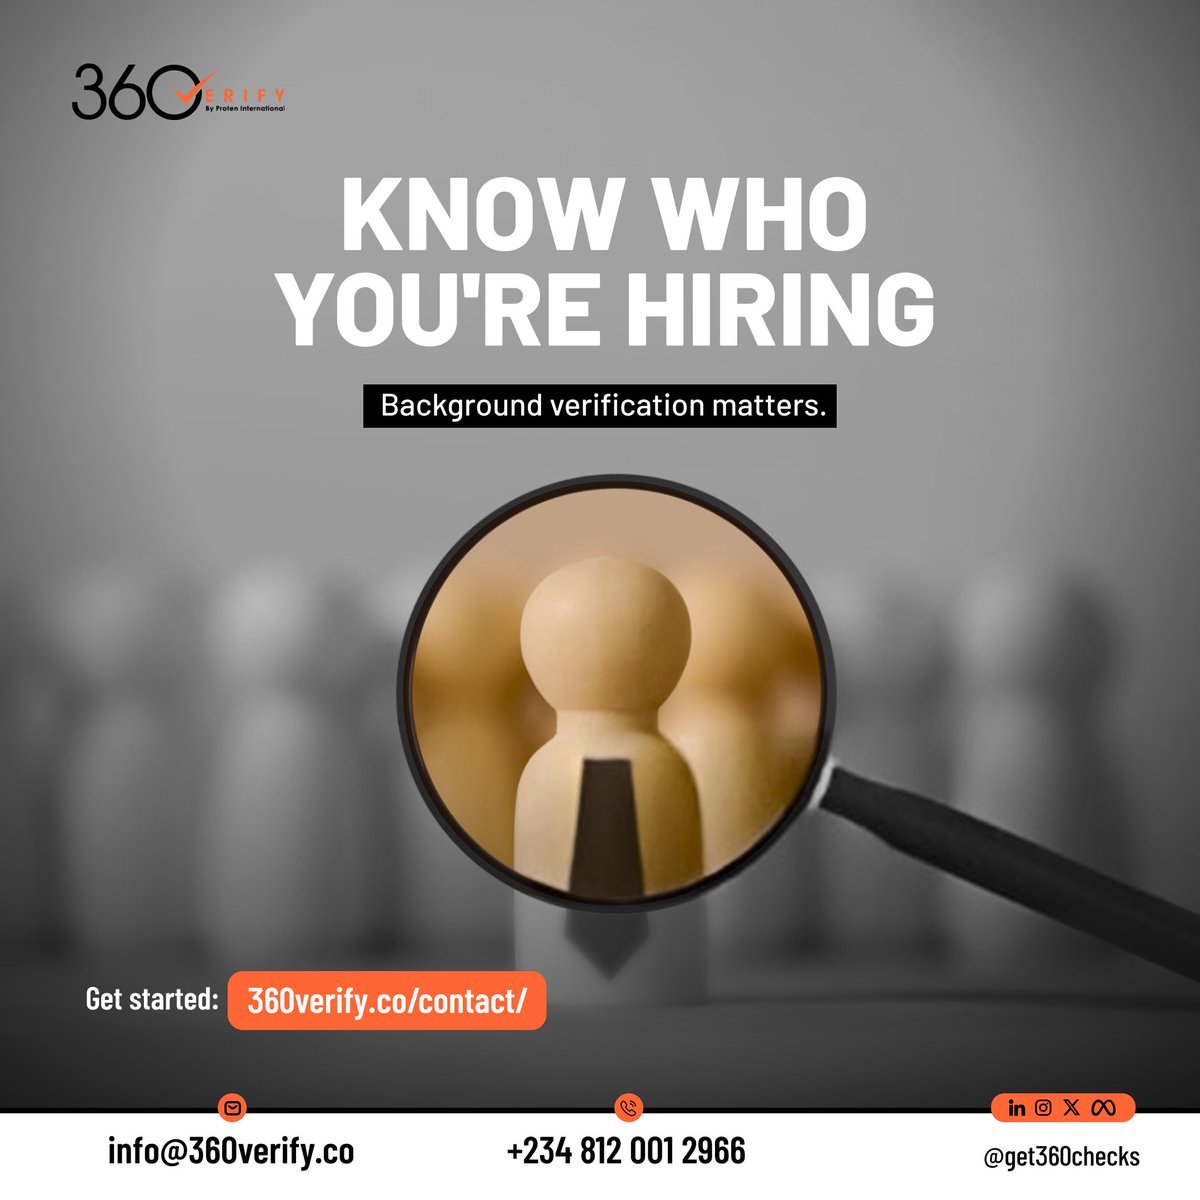 Another Monday, another opportunity to ensure you're making informed hiring decisions.

#BackgroundChecks matter.  Prioritize thorough background checks to safeguard your workplace environment.

Ready to get started? Visit 360verify.co/contact today.
#360Verify  #HRManagers